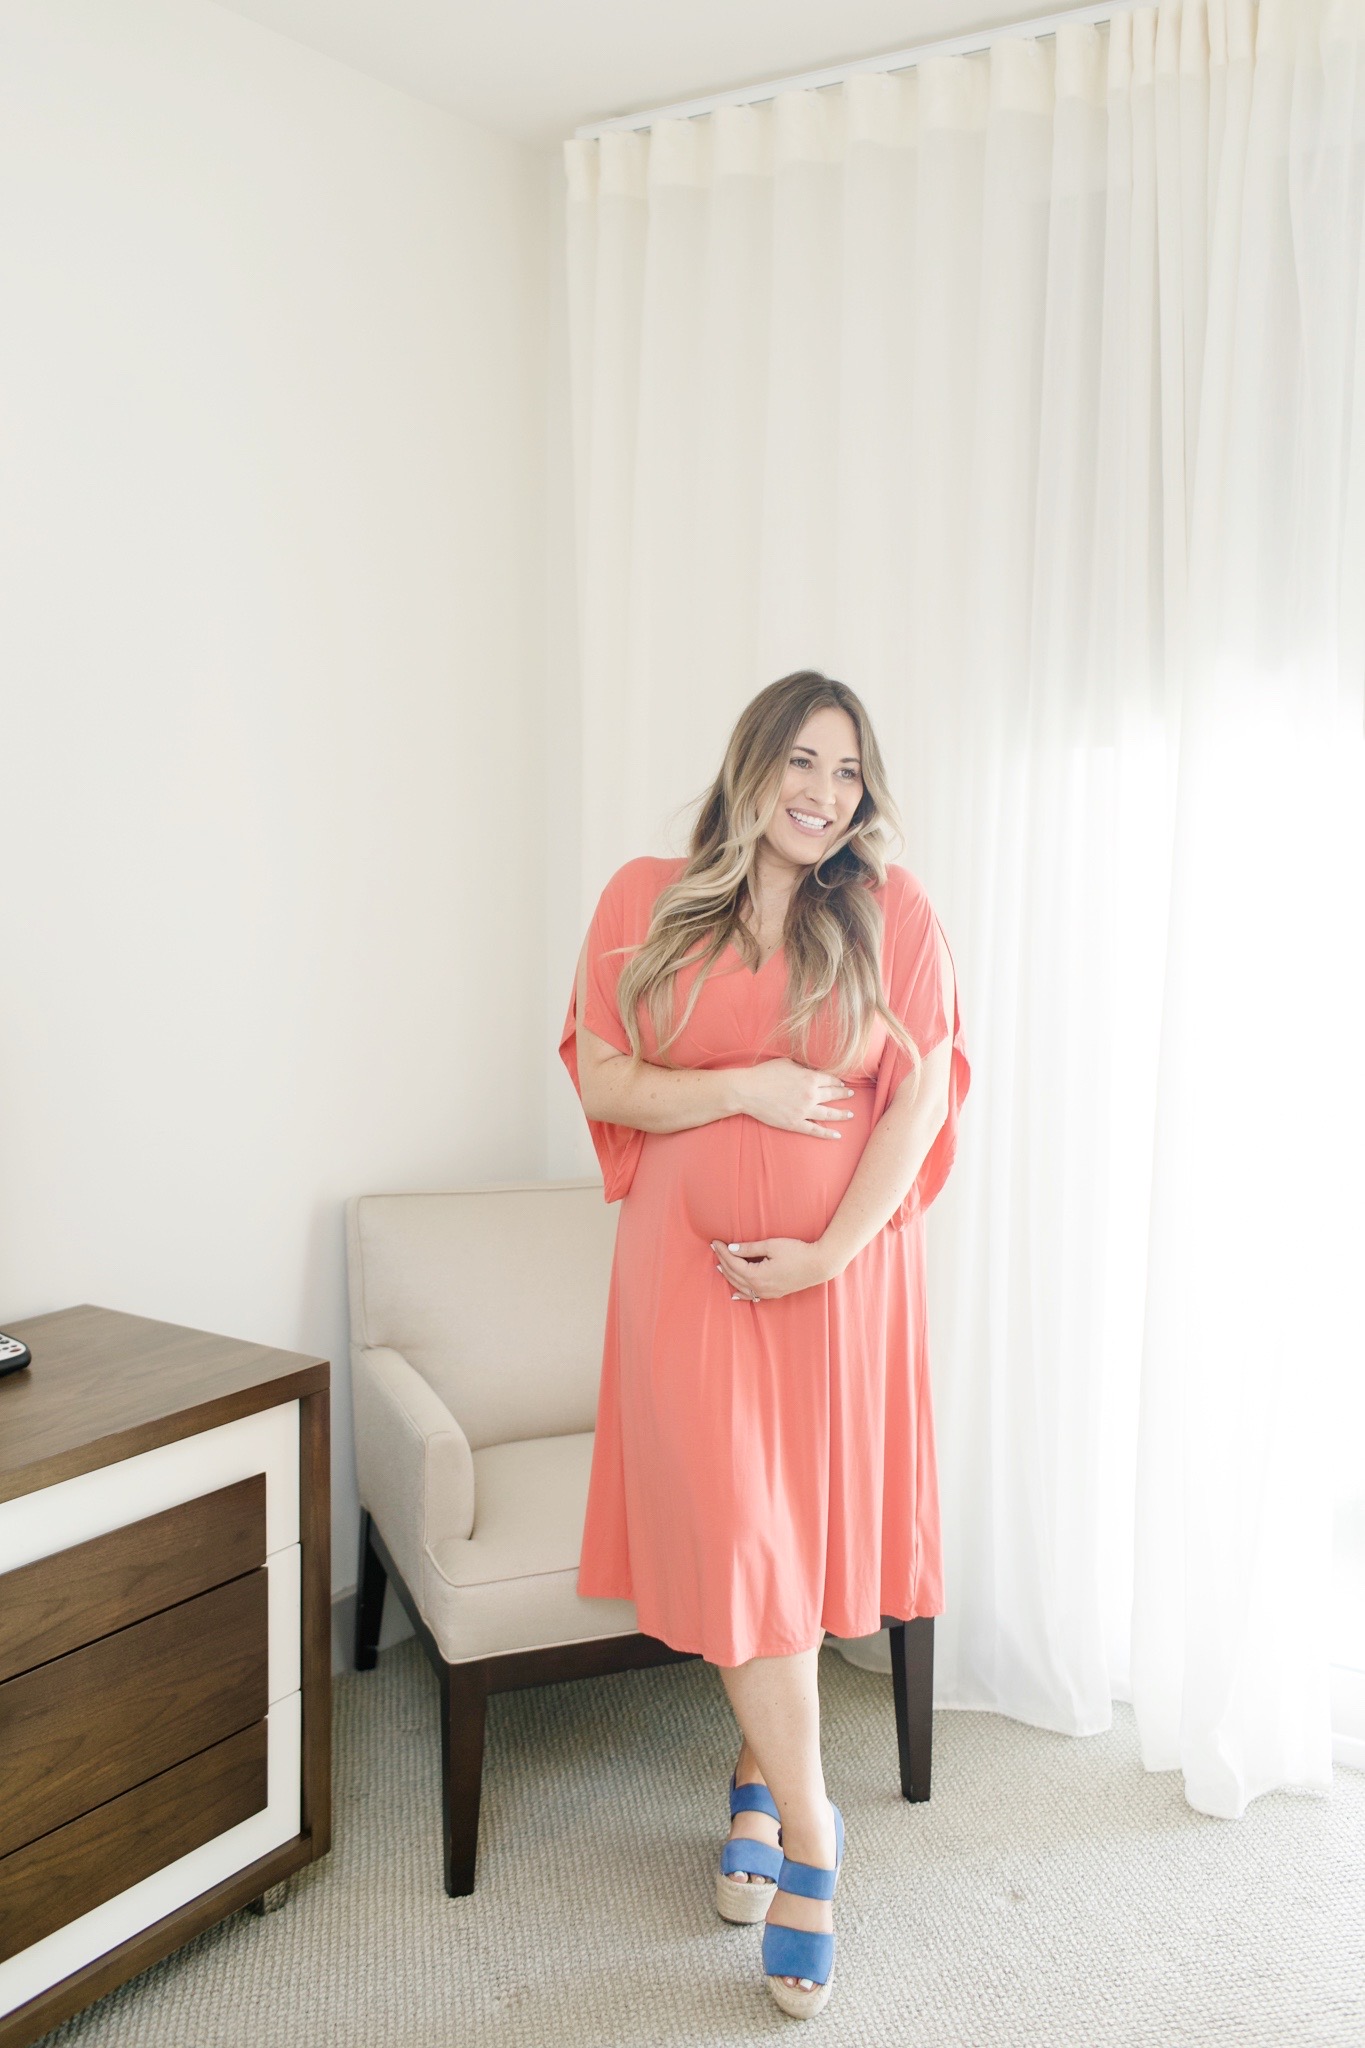 La Belle Bump Maternity Clothing Subscription Box review featured by top Memphis fashion blogger, Walking in High Heels.